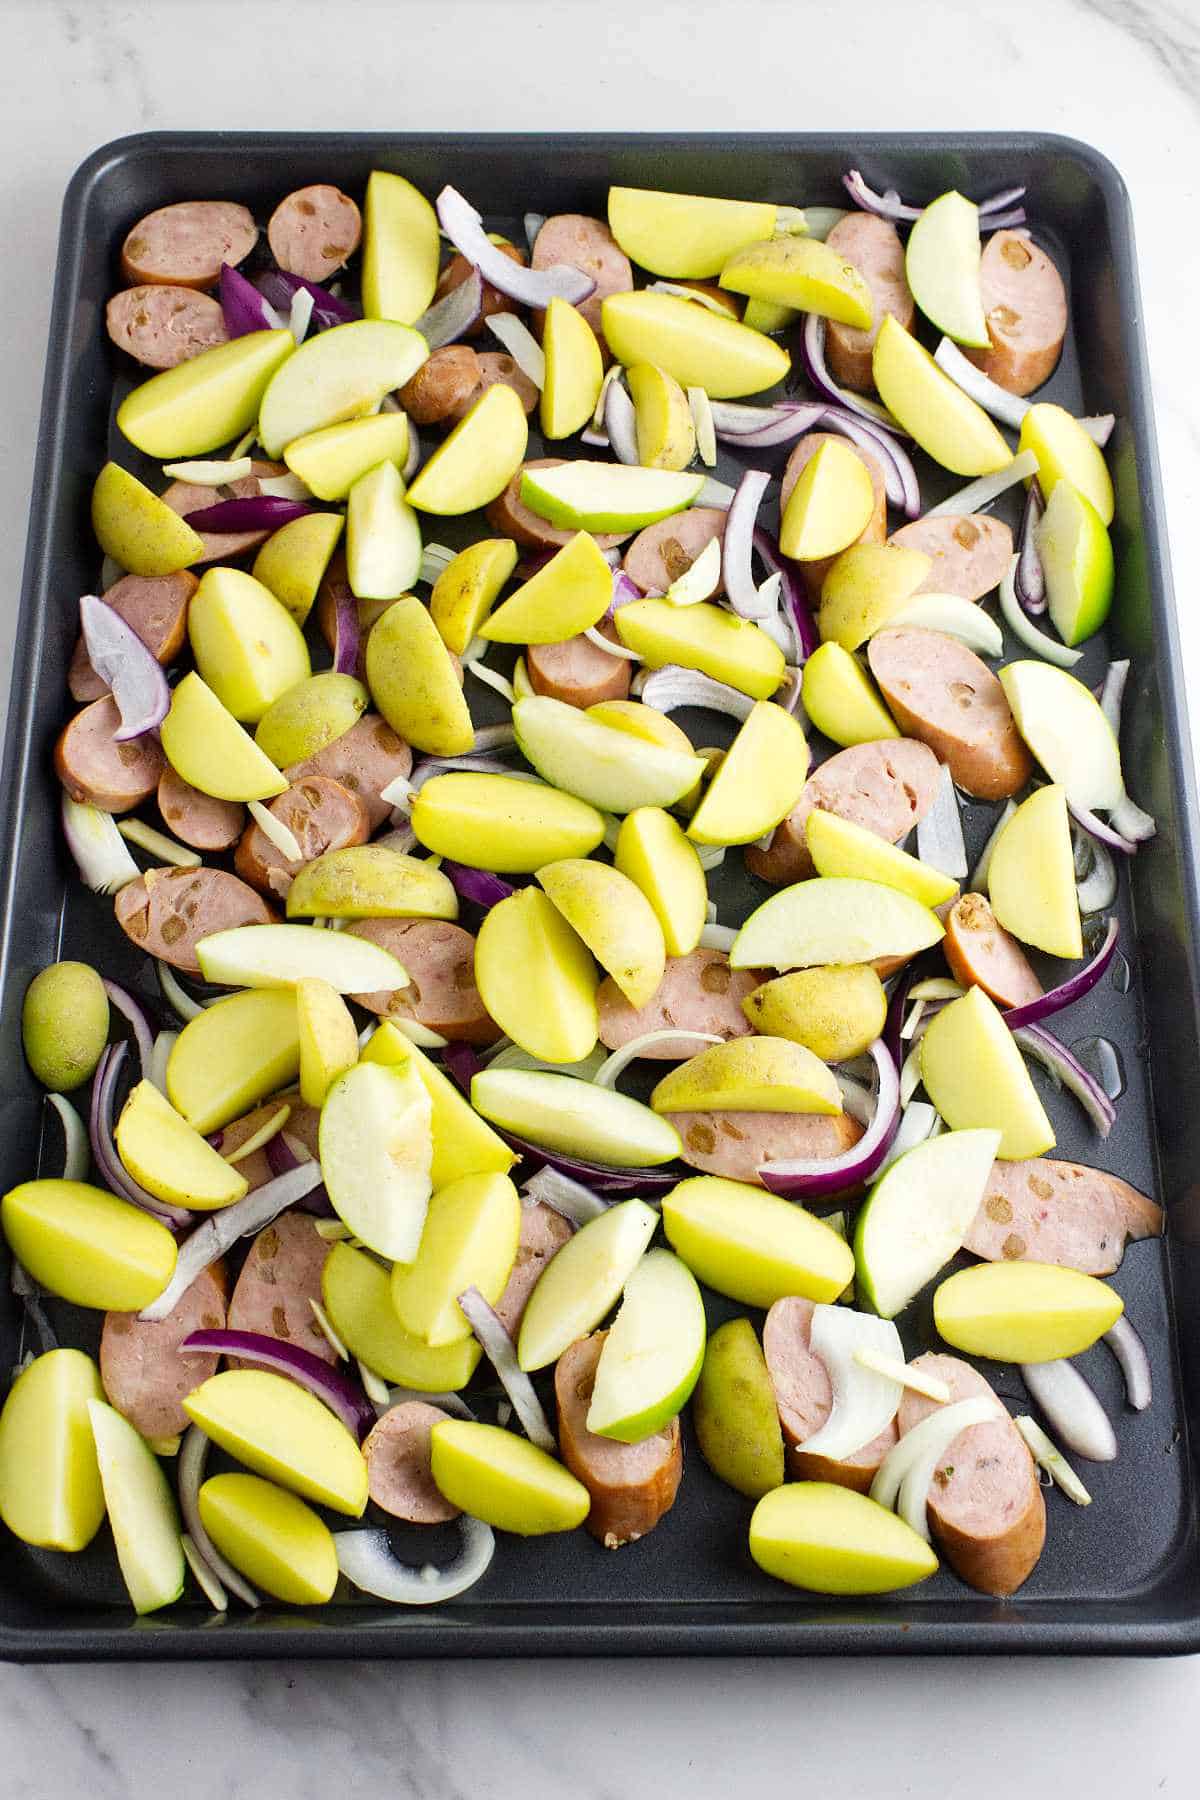 potatoes and apples added to baking pan.